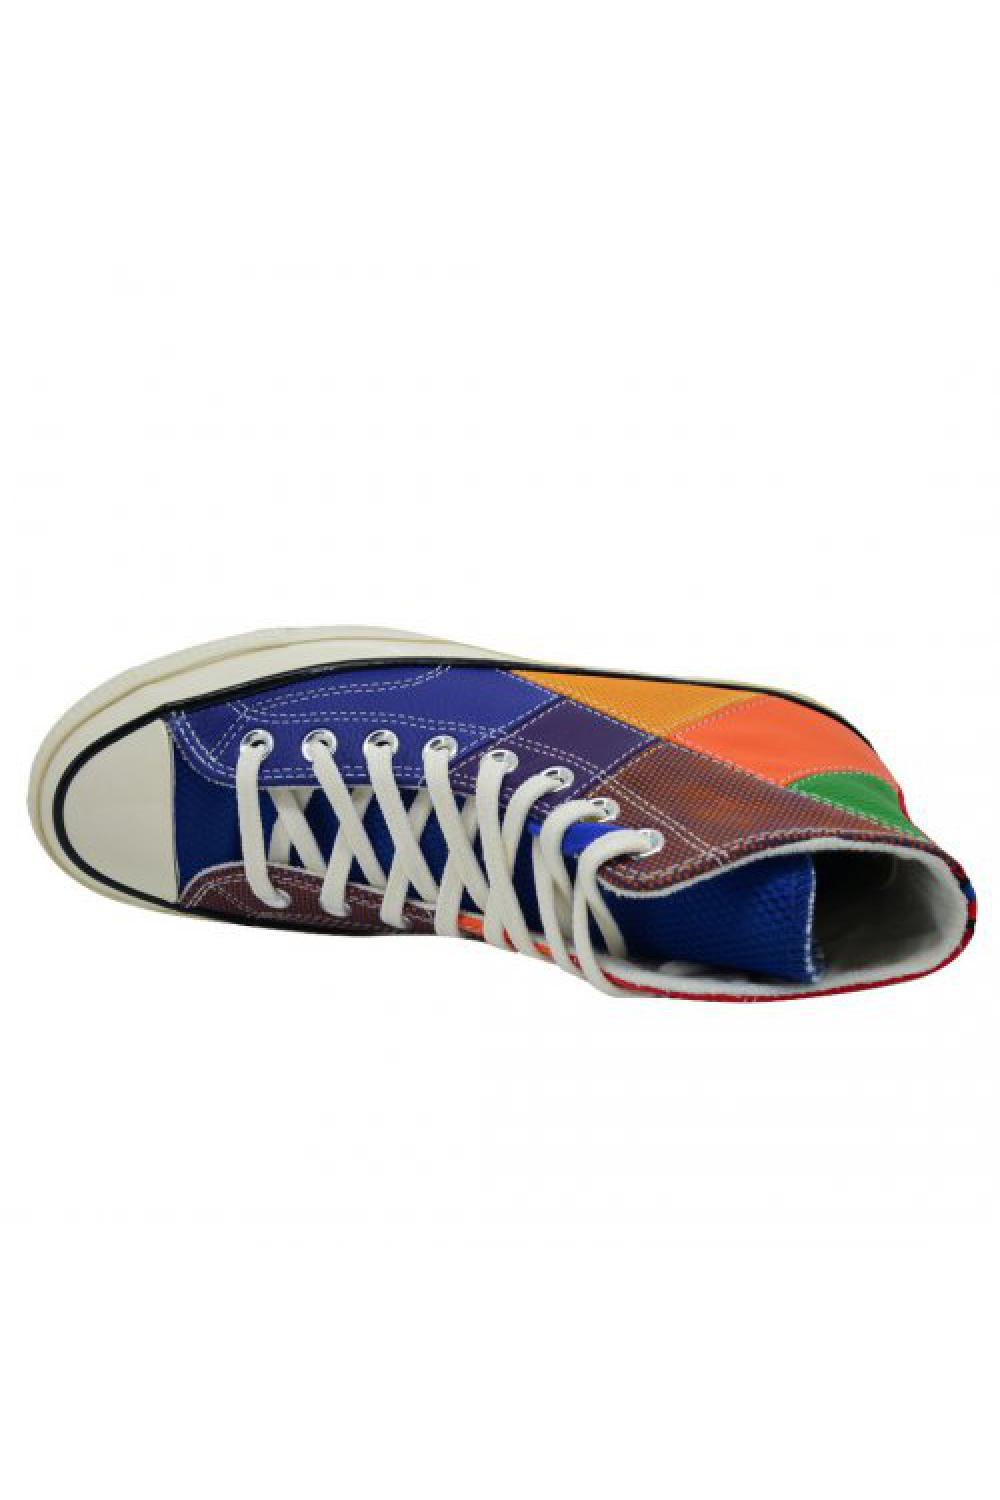 ALL STAR CONVERSE Sneaker Chuck Taylor 70s 75th Anniversary High Top |  Wearhouse